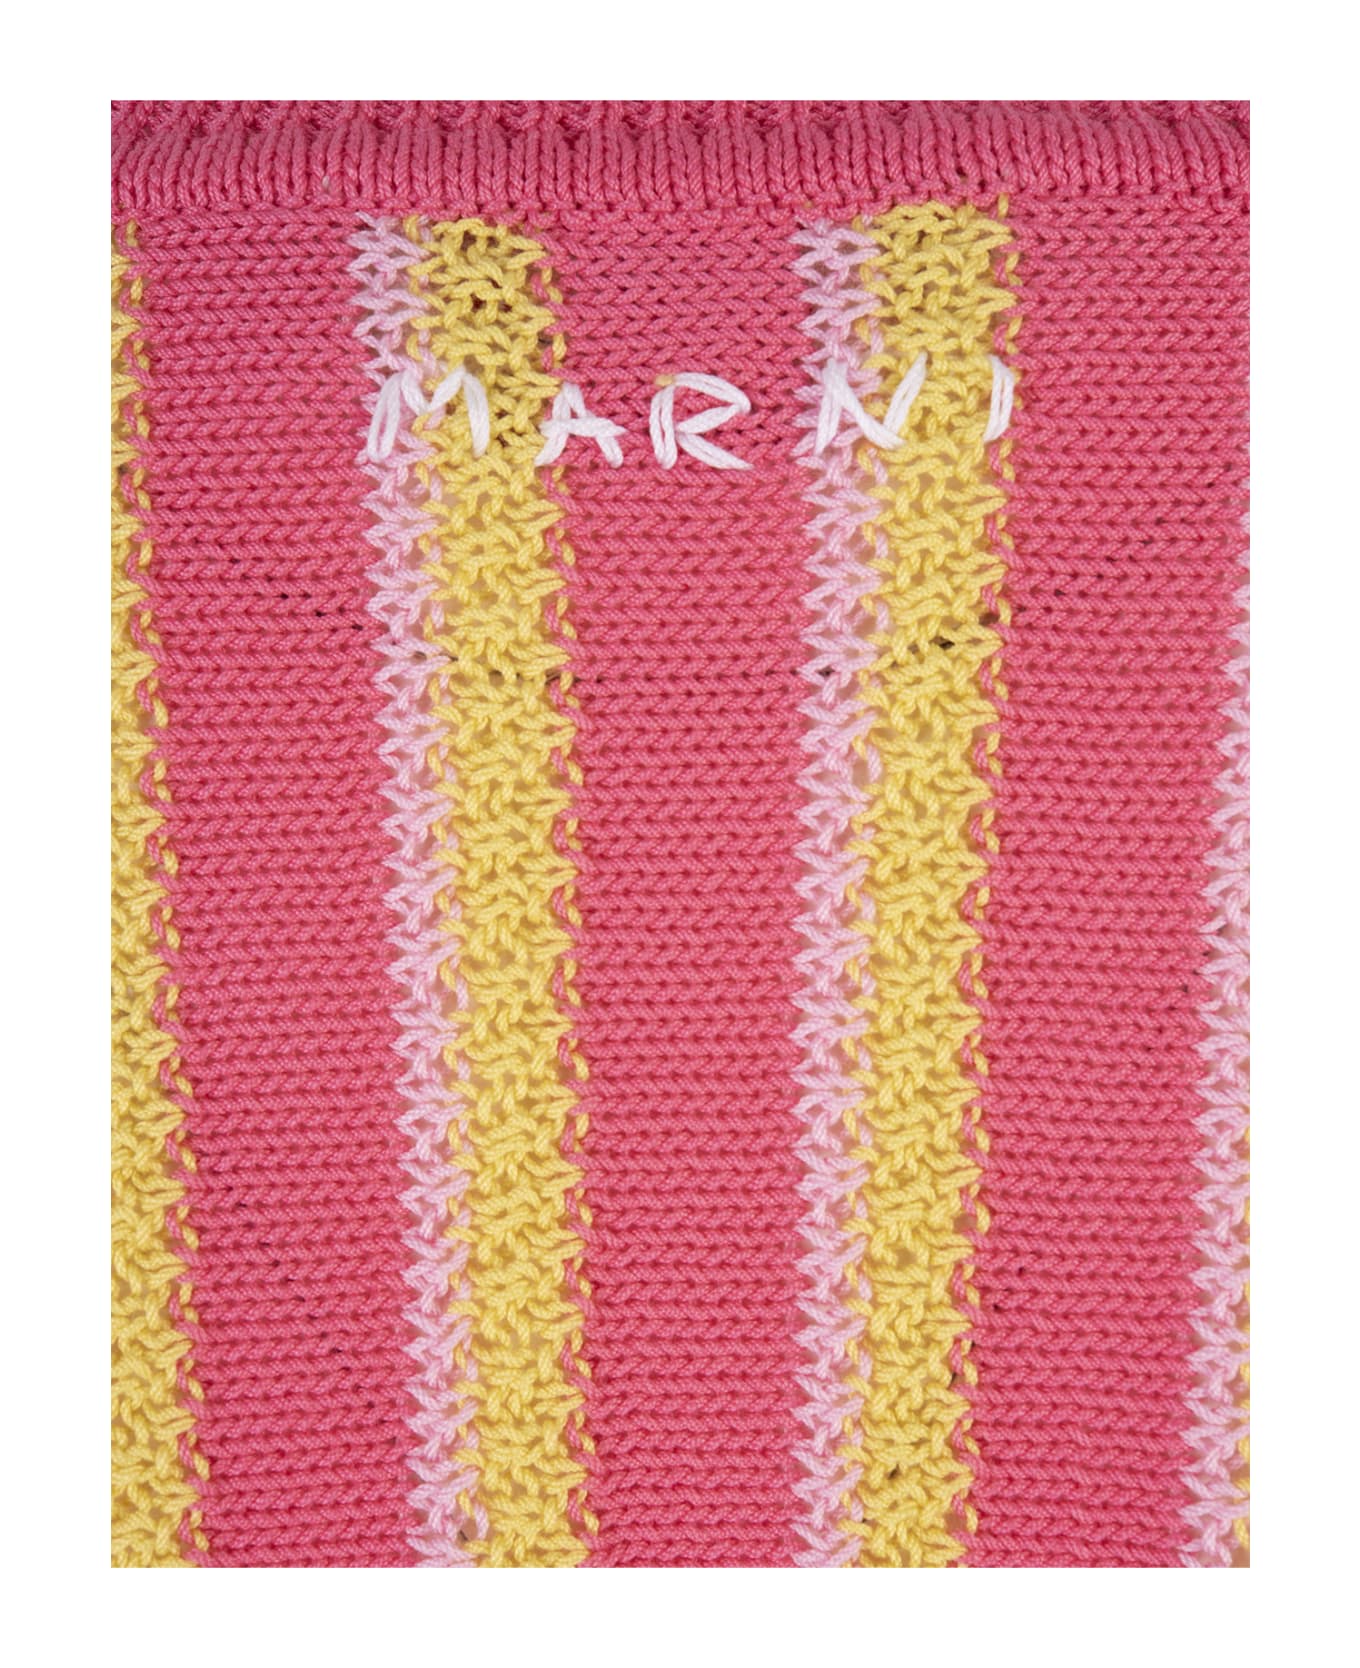 Marni Pink, Yellow And White Striped Knitted Crop Pullover - Pink